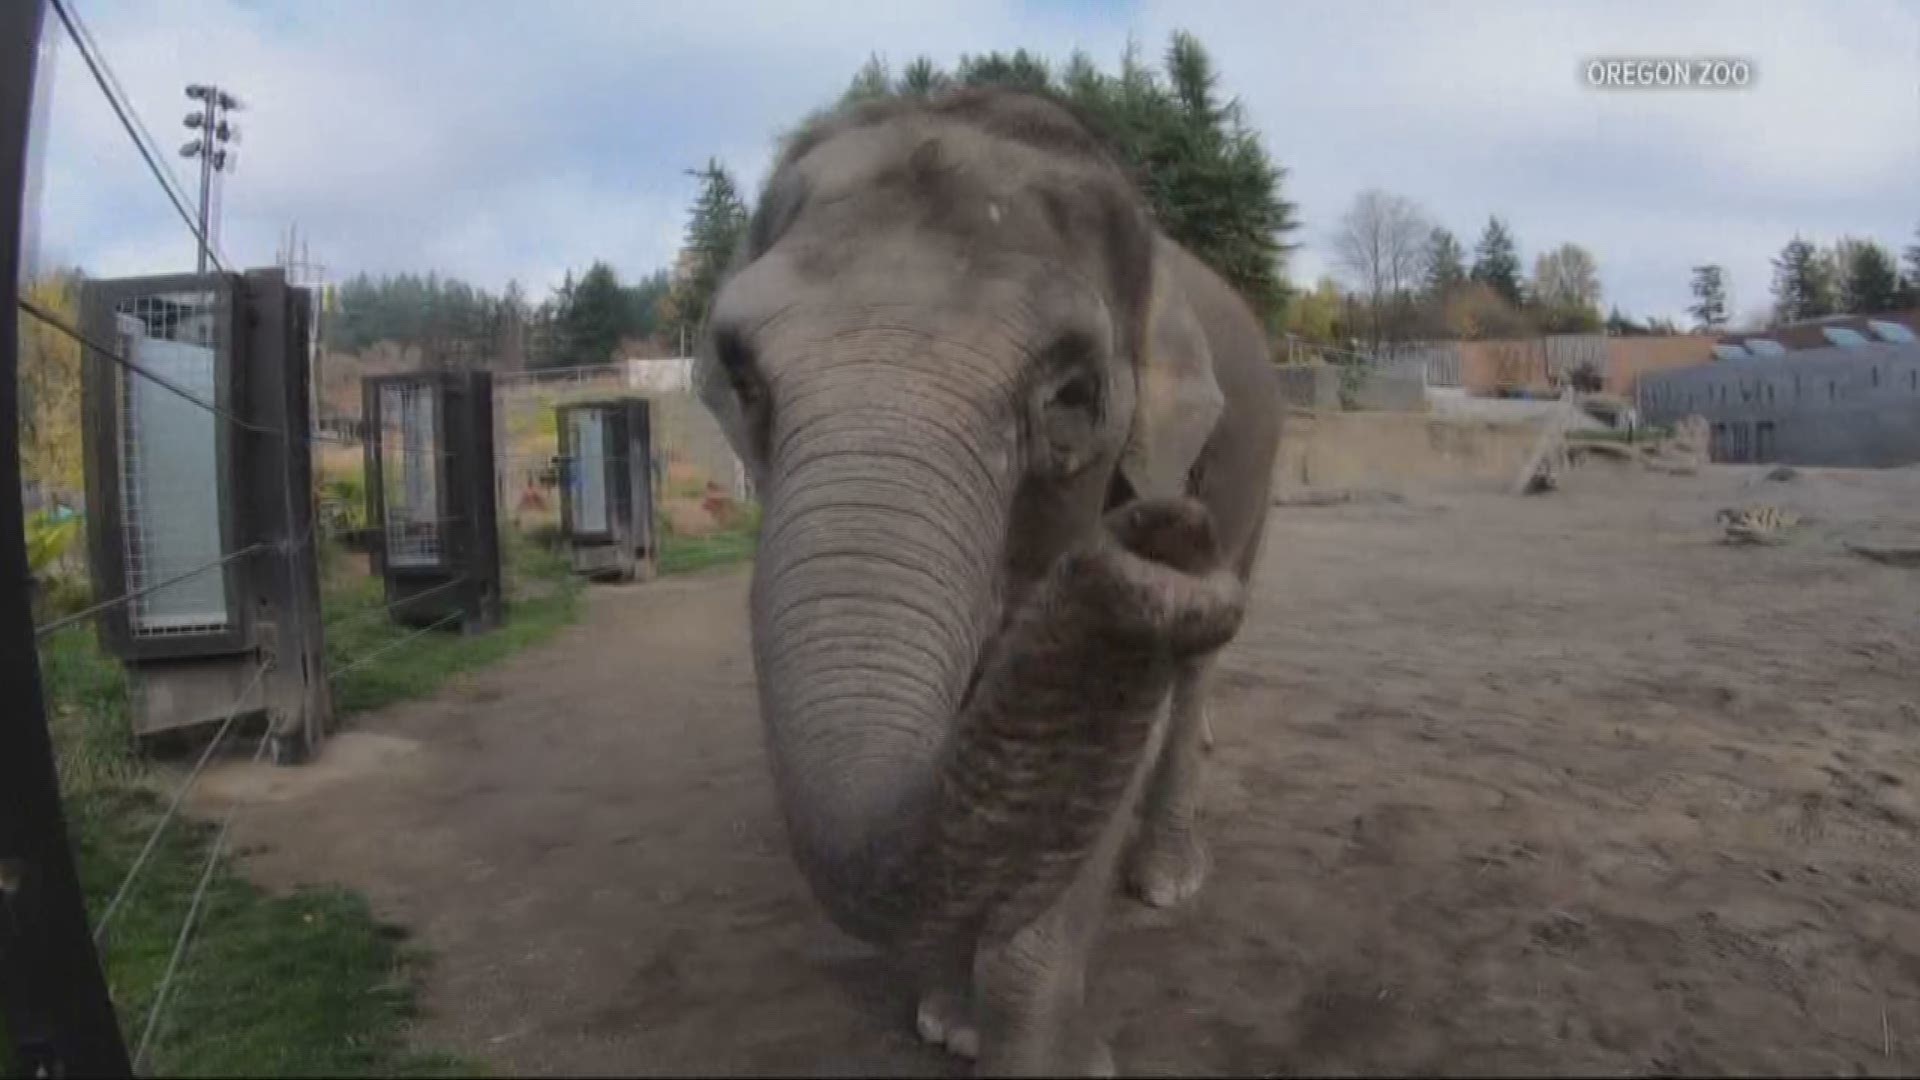 Chendra, a 26-year-old Asian elephant at the Oregon Zoo, had a miscarriage after nearly eight months of pregnancy